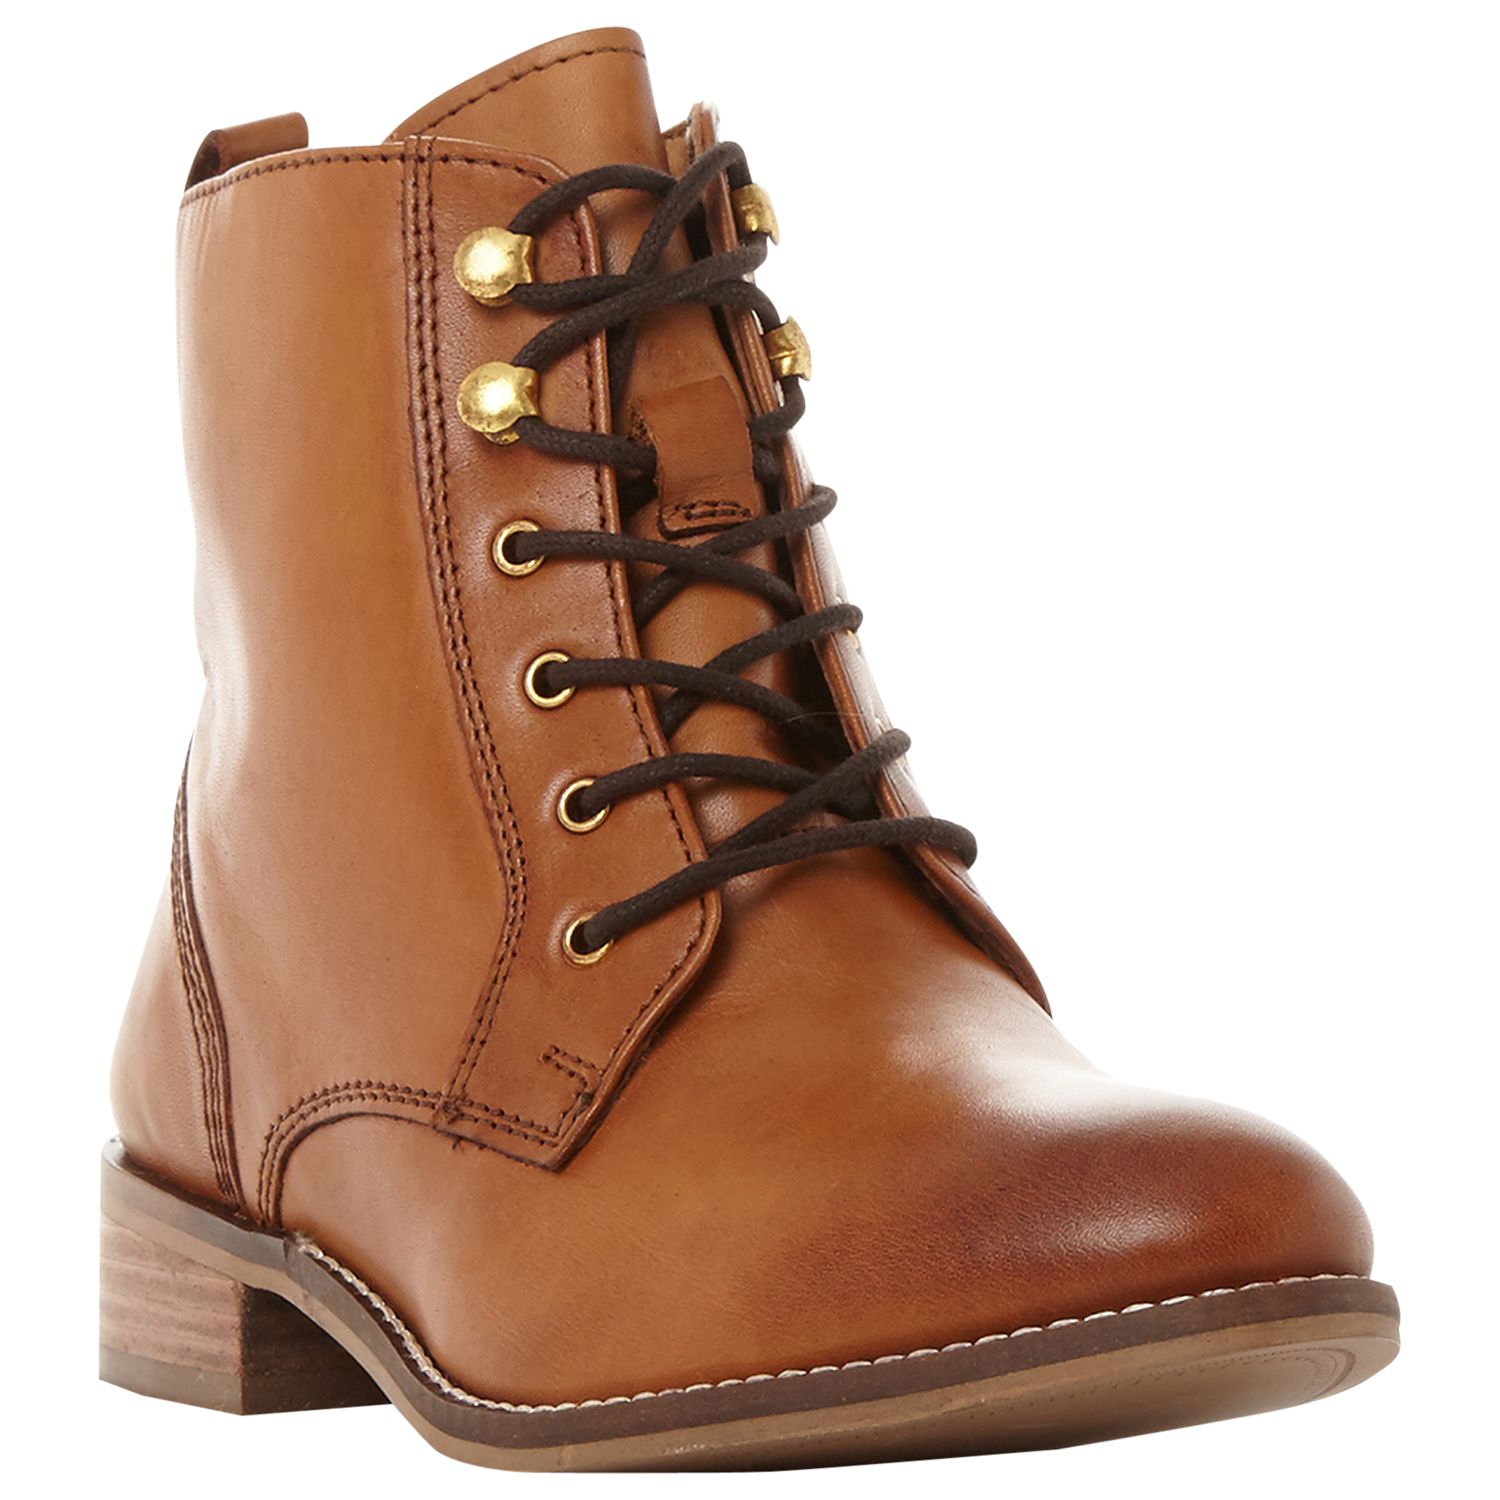 Dune Quincey Lace Up Ankle Boots, Tan Leather at John Lewis & Partners